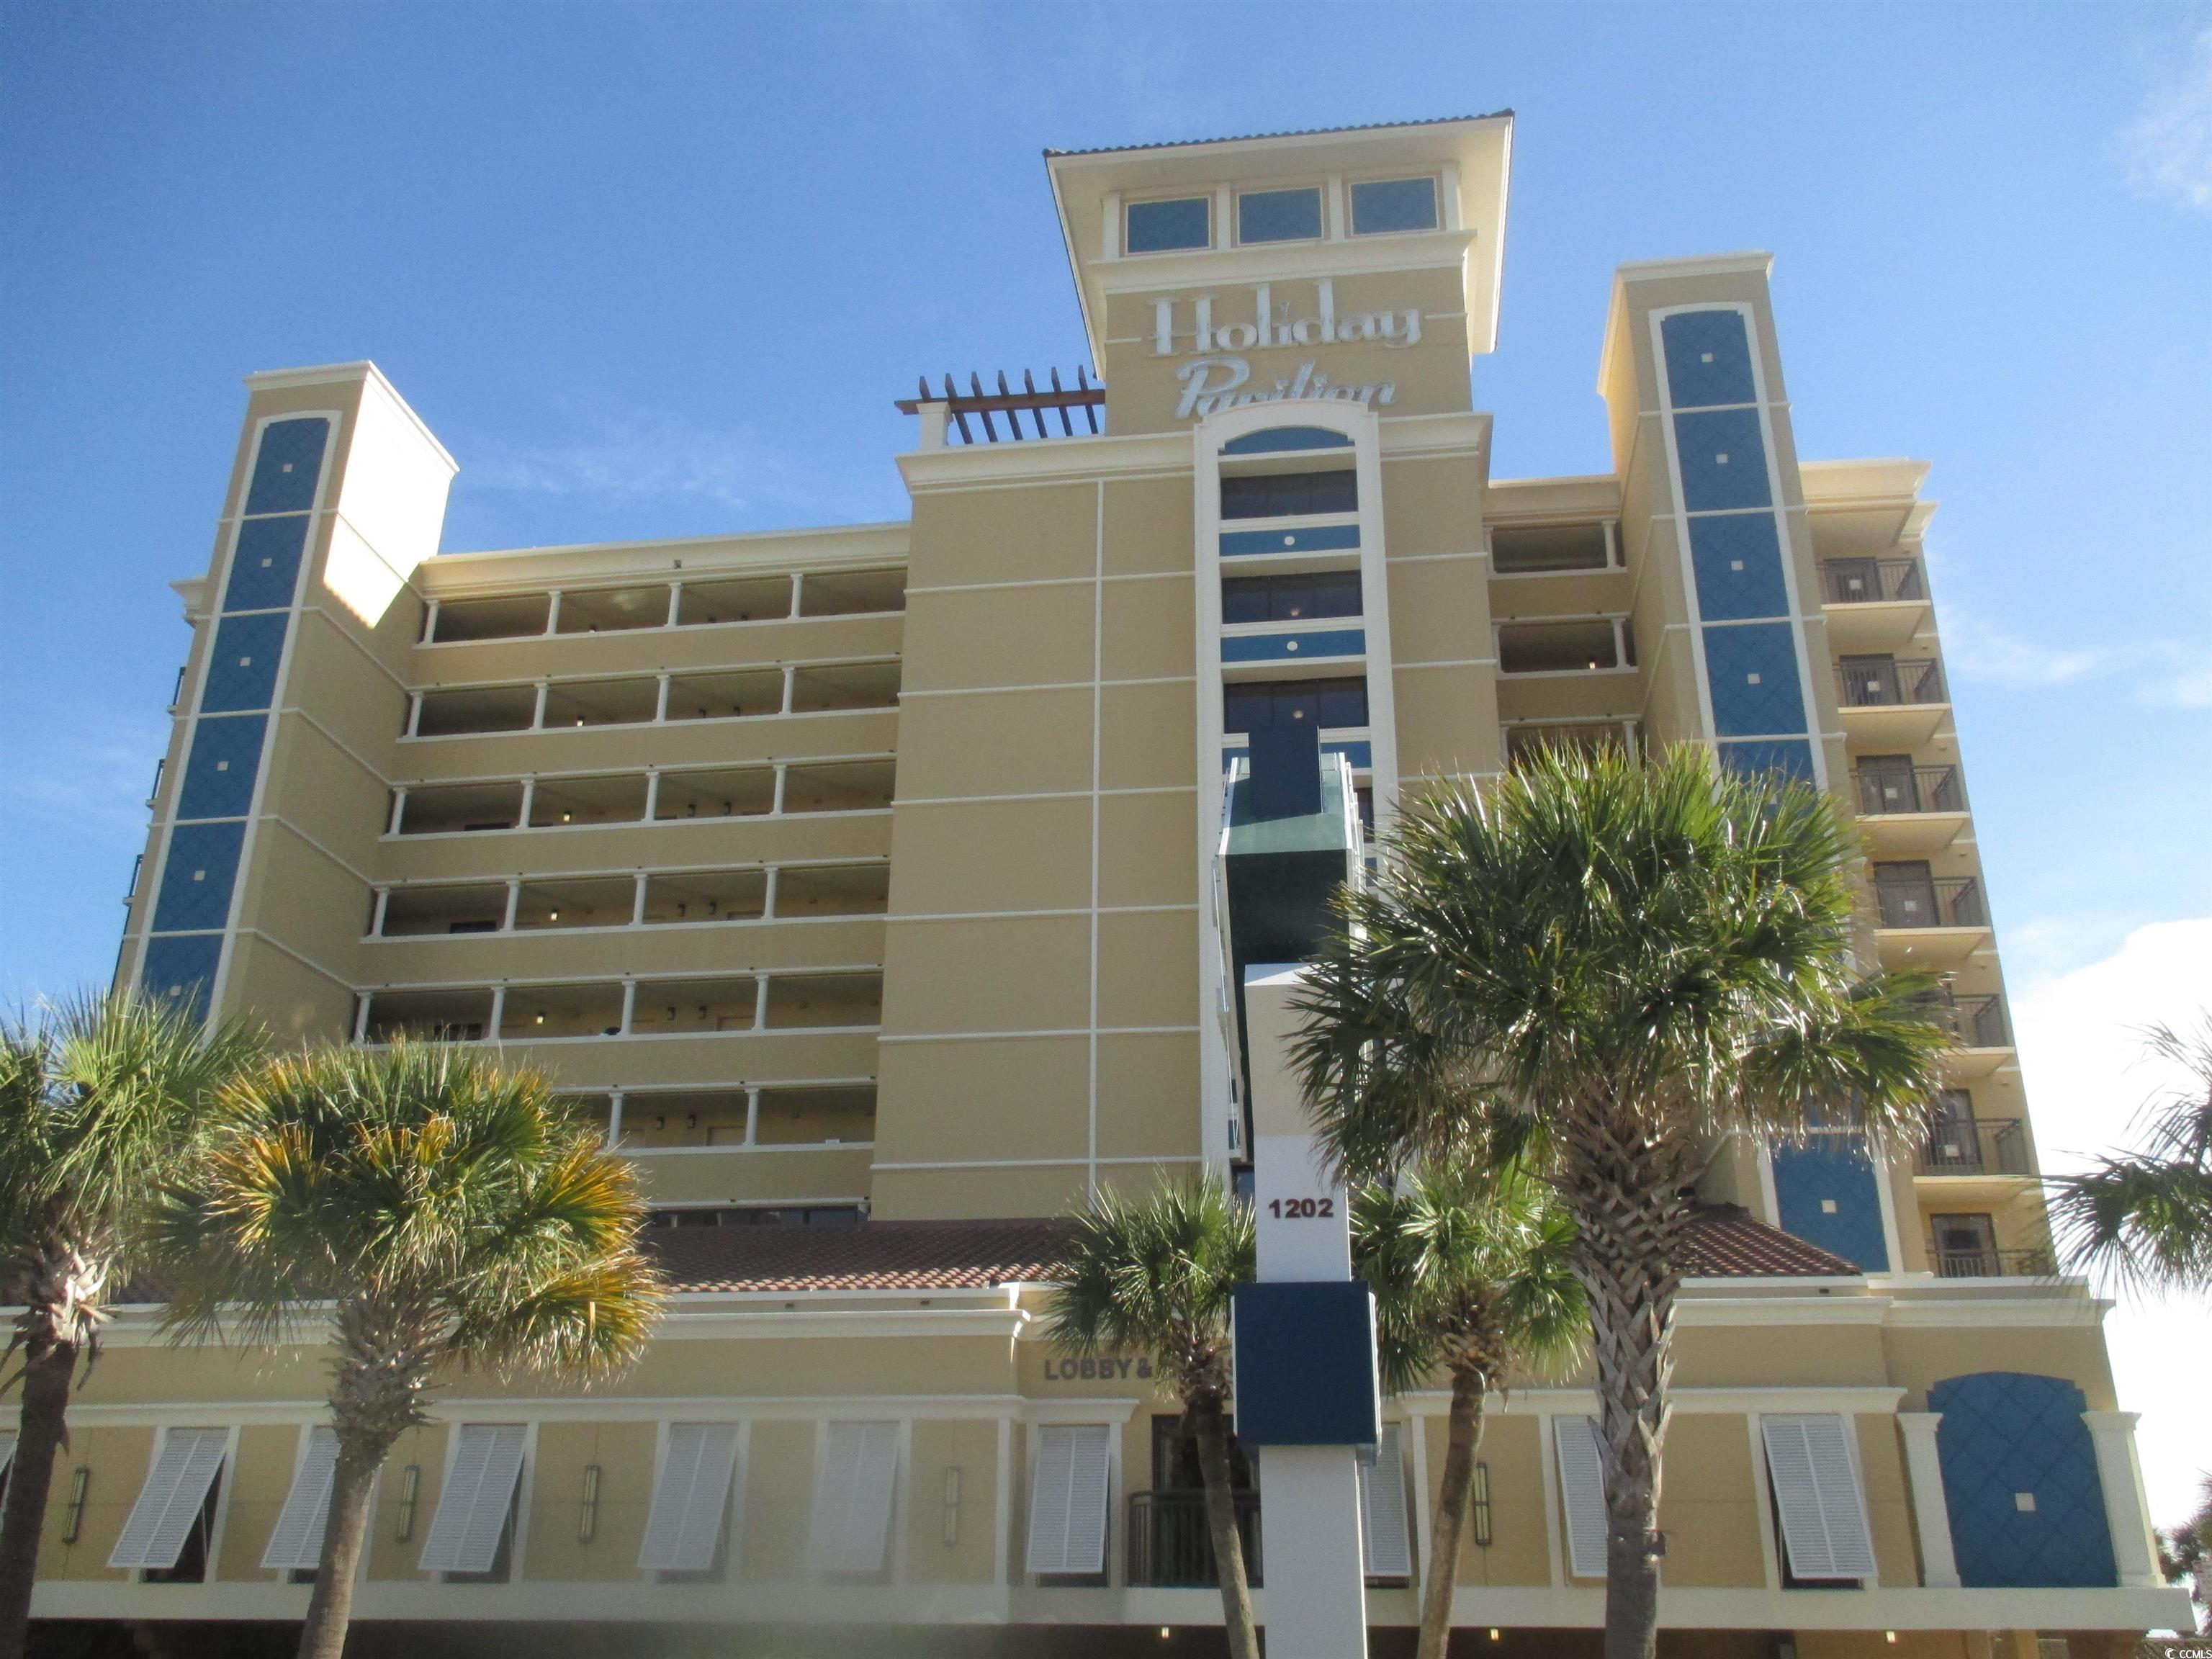 this condo at holiday inn pavilion is direct oceanfront with breath taking views of the atlantic ocean from the living area and panoramic views from the oceanfront balcony. if you are looking for a vacation retreat or a high rental income investment, the holiday inn pavilion is the best of what myrtle beach has to offer in the heart of downtown at the "big wheel" location. hoa fee includes: insurance, electric in condo, cable tv, internet, pest control, security, trash pick-up, water and sewer, etc. amenities feature: indoor and outdoor pools, lazy river, kiddie pool, hot tub, poolside tiki bar, coffee shop, fitness center and much more.